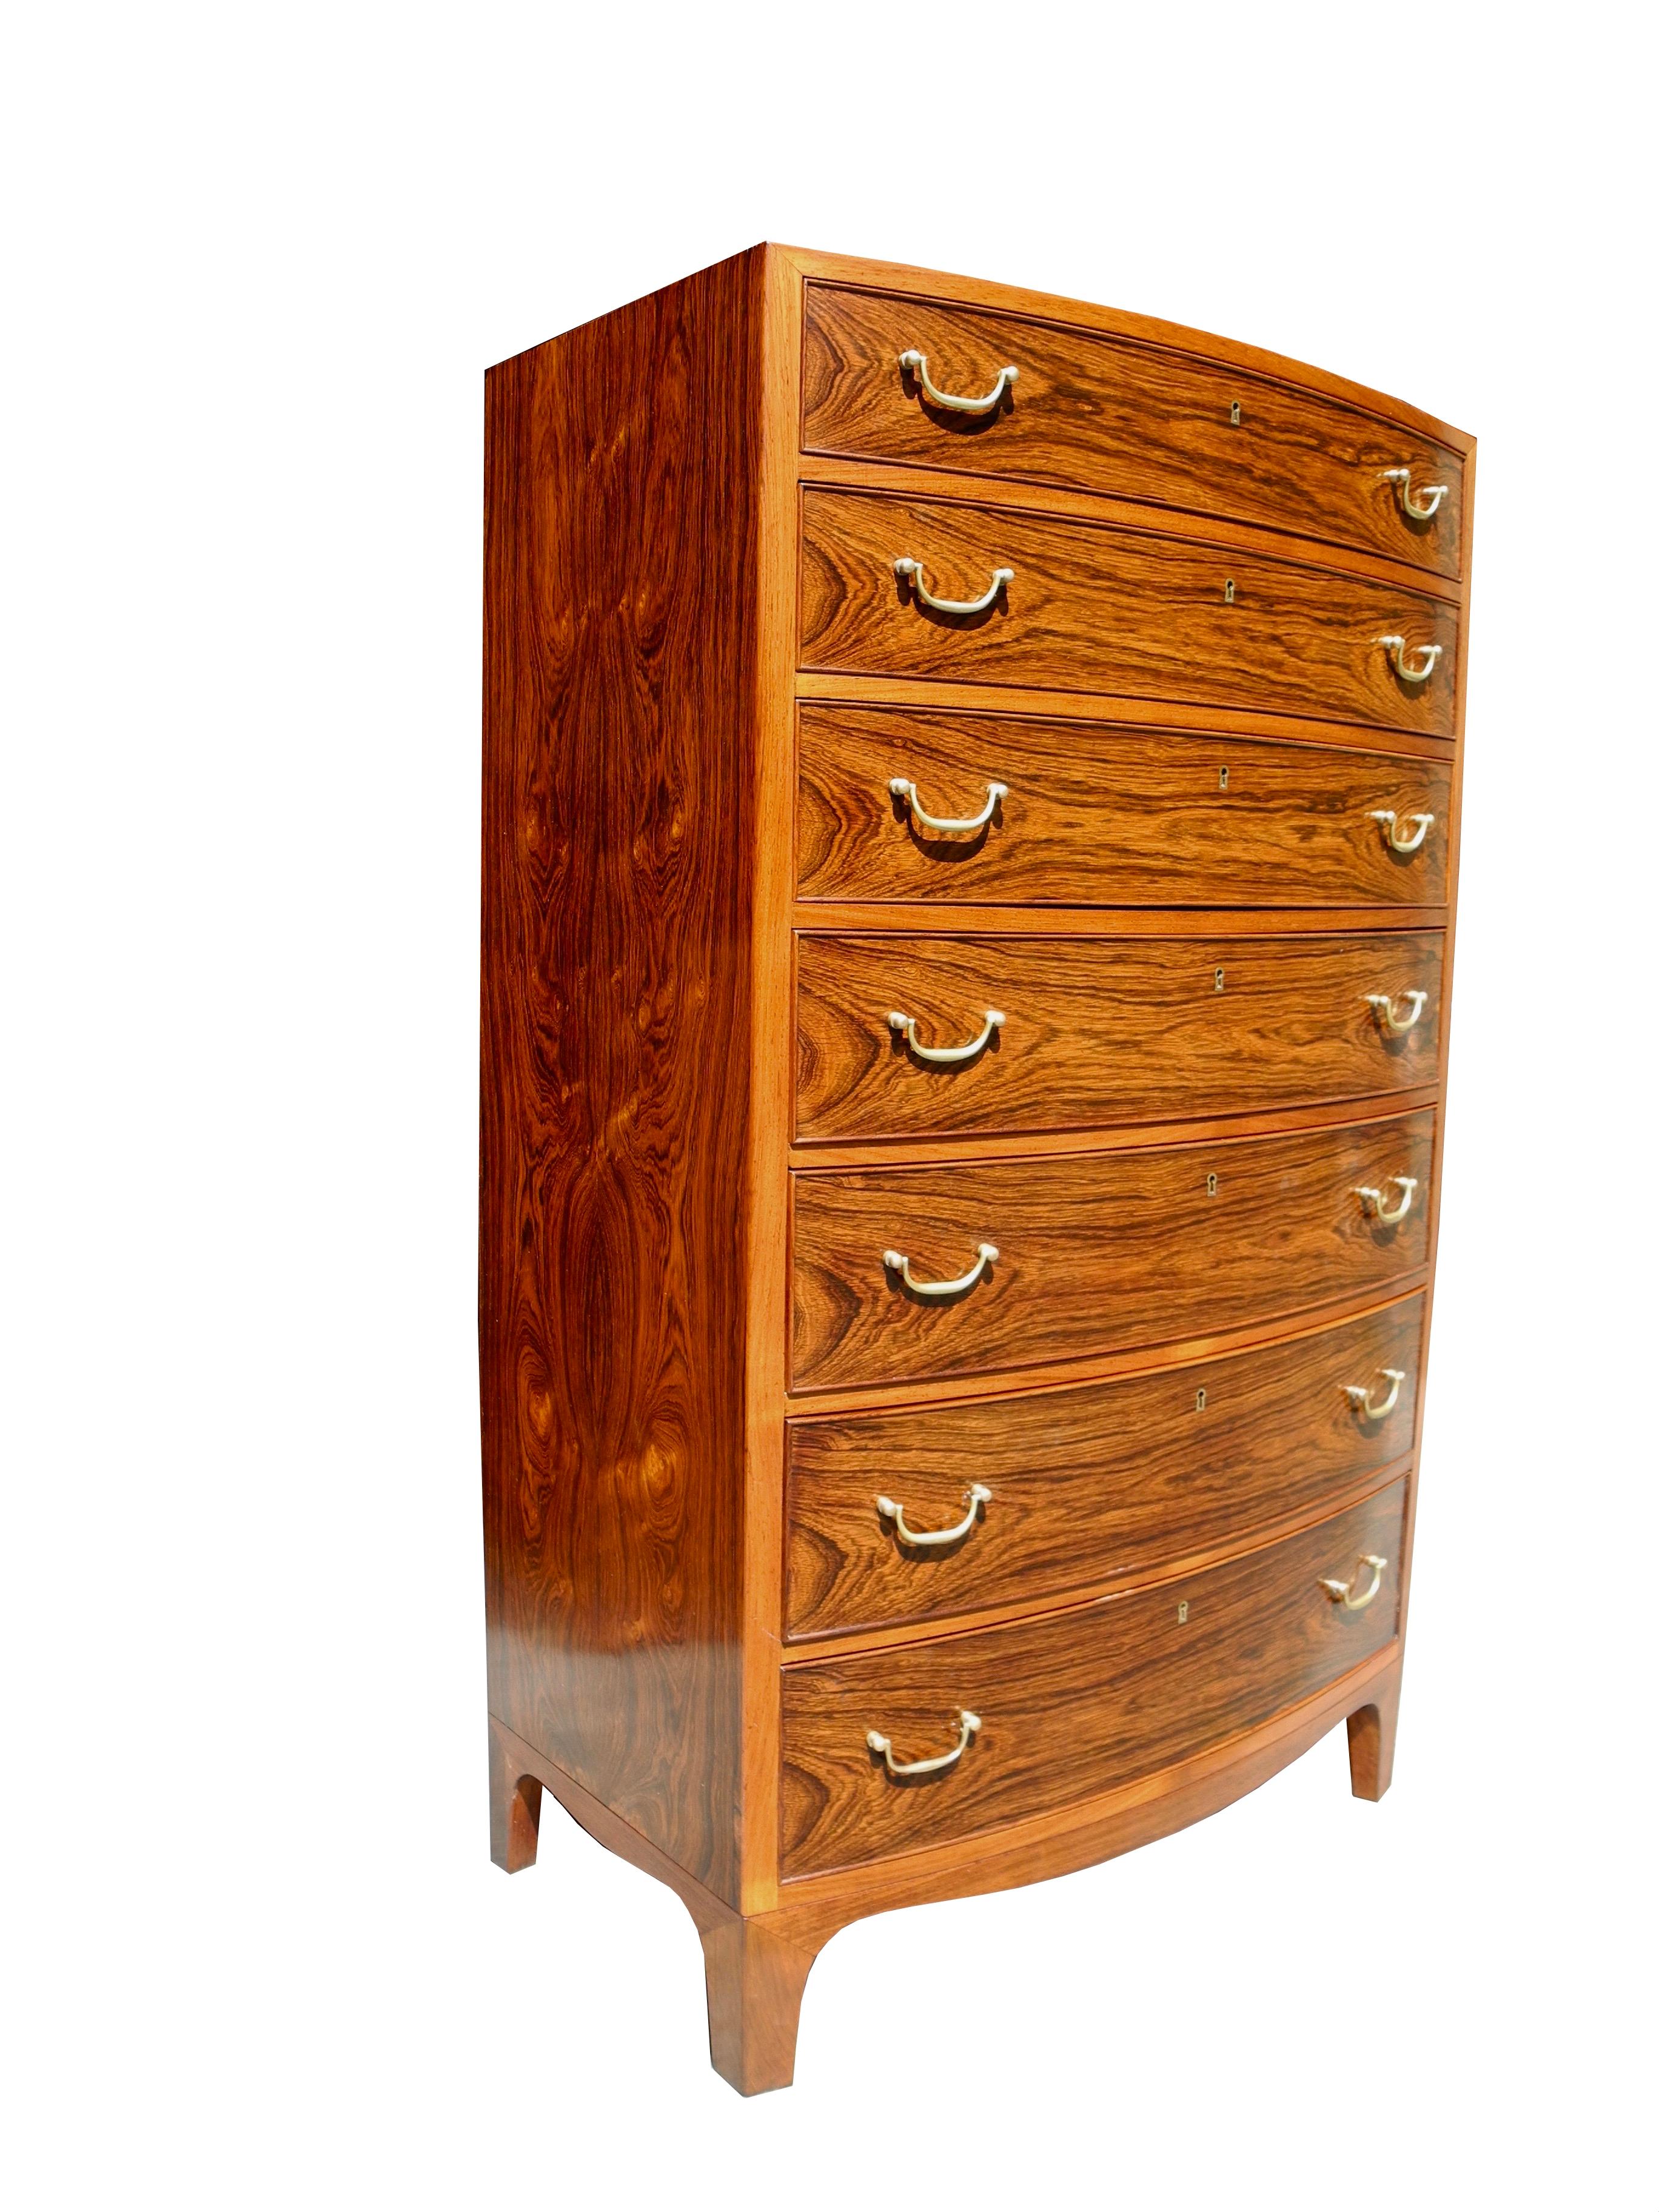 This beautifully crafted rosewood tall dresser with a subtle bombe front was made in Denmark and designed by the architect Ole Wanscher. Its condition is very good with clean insides, a refinished natural case and solid brass pulls.